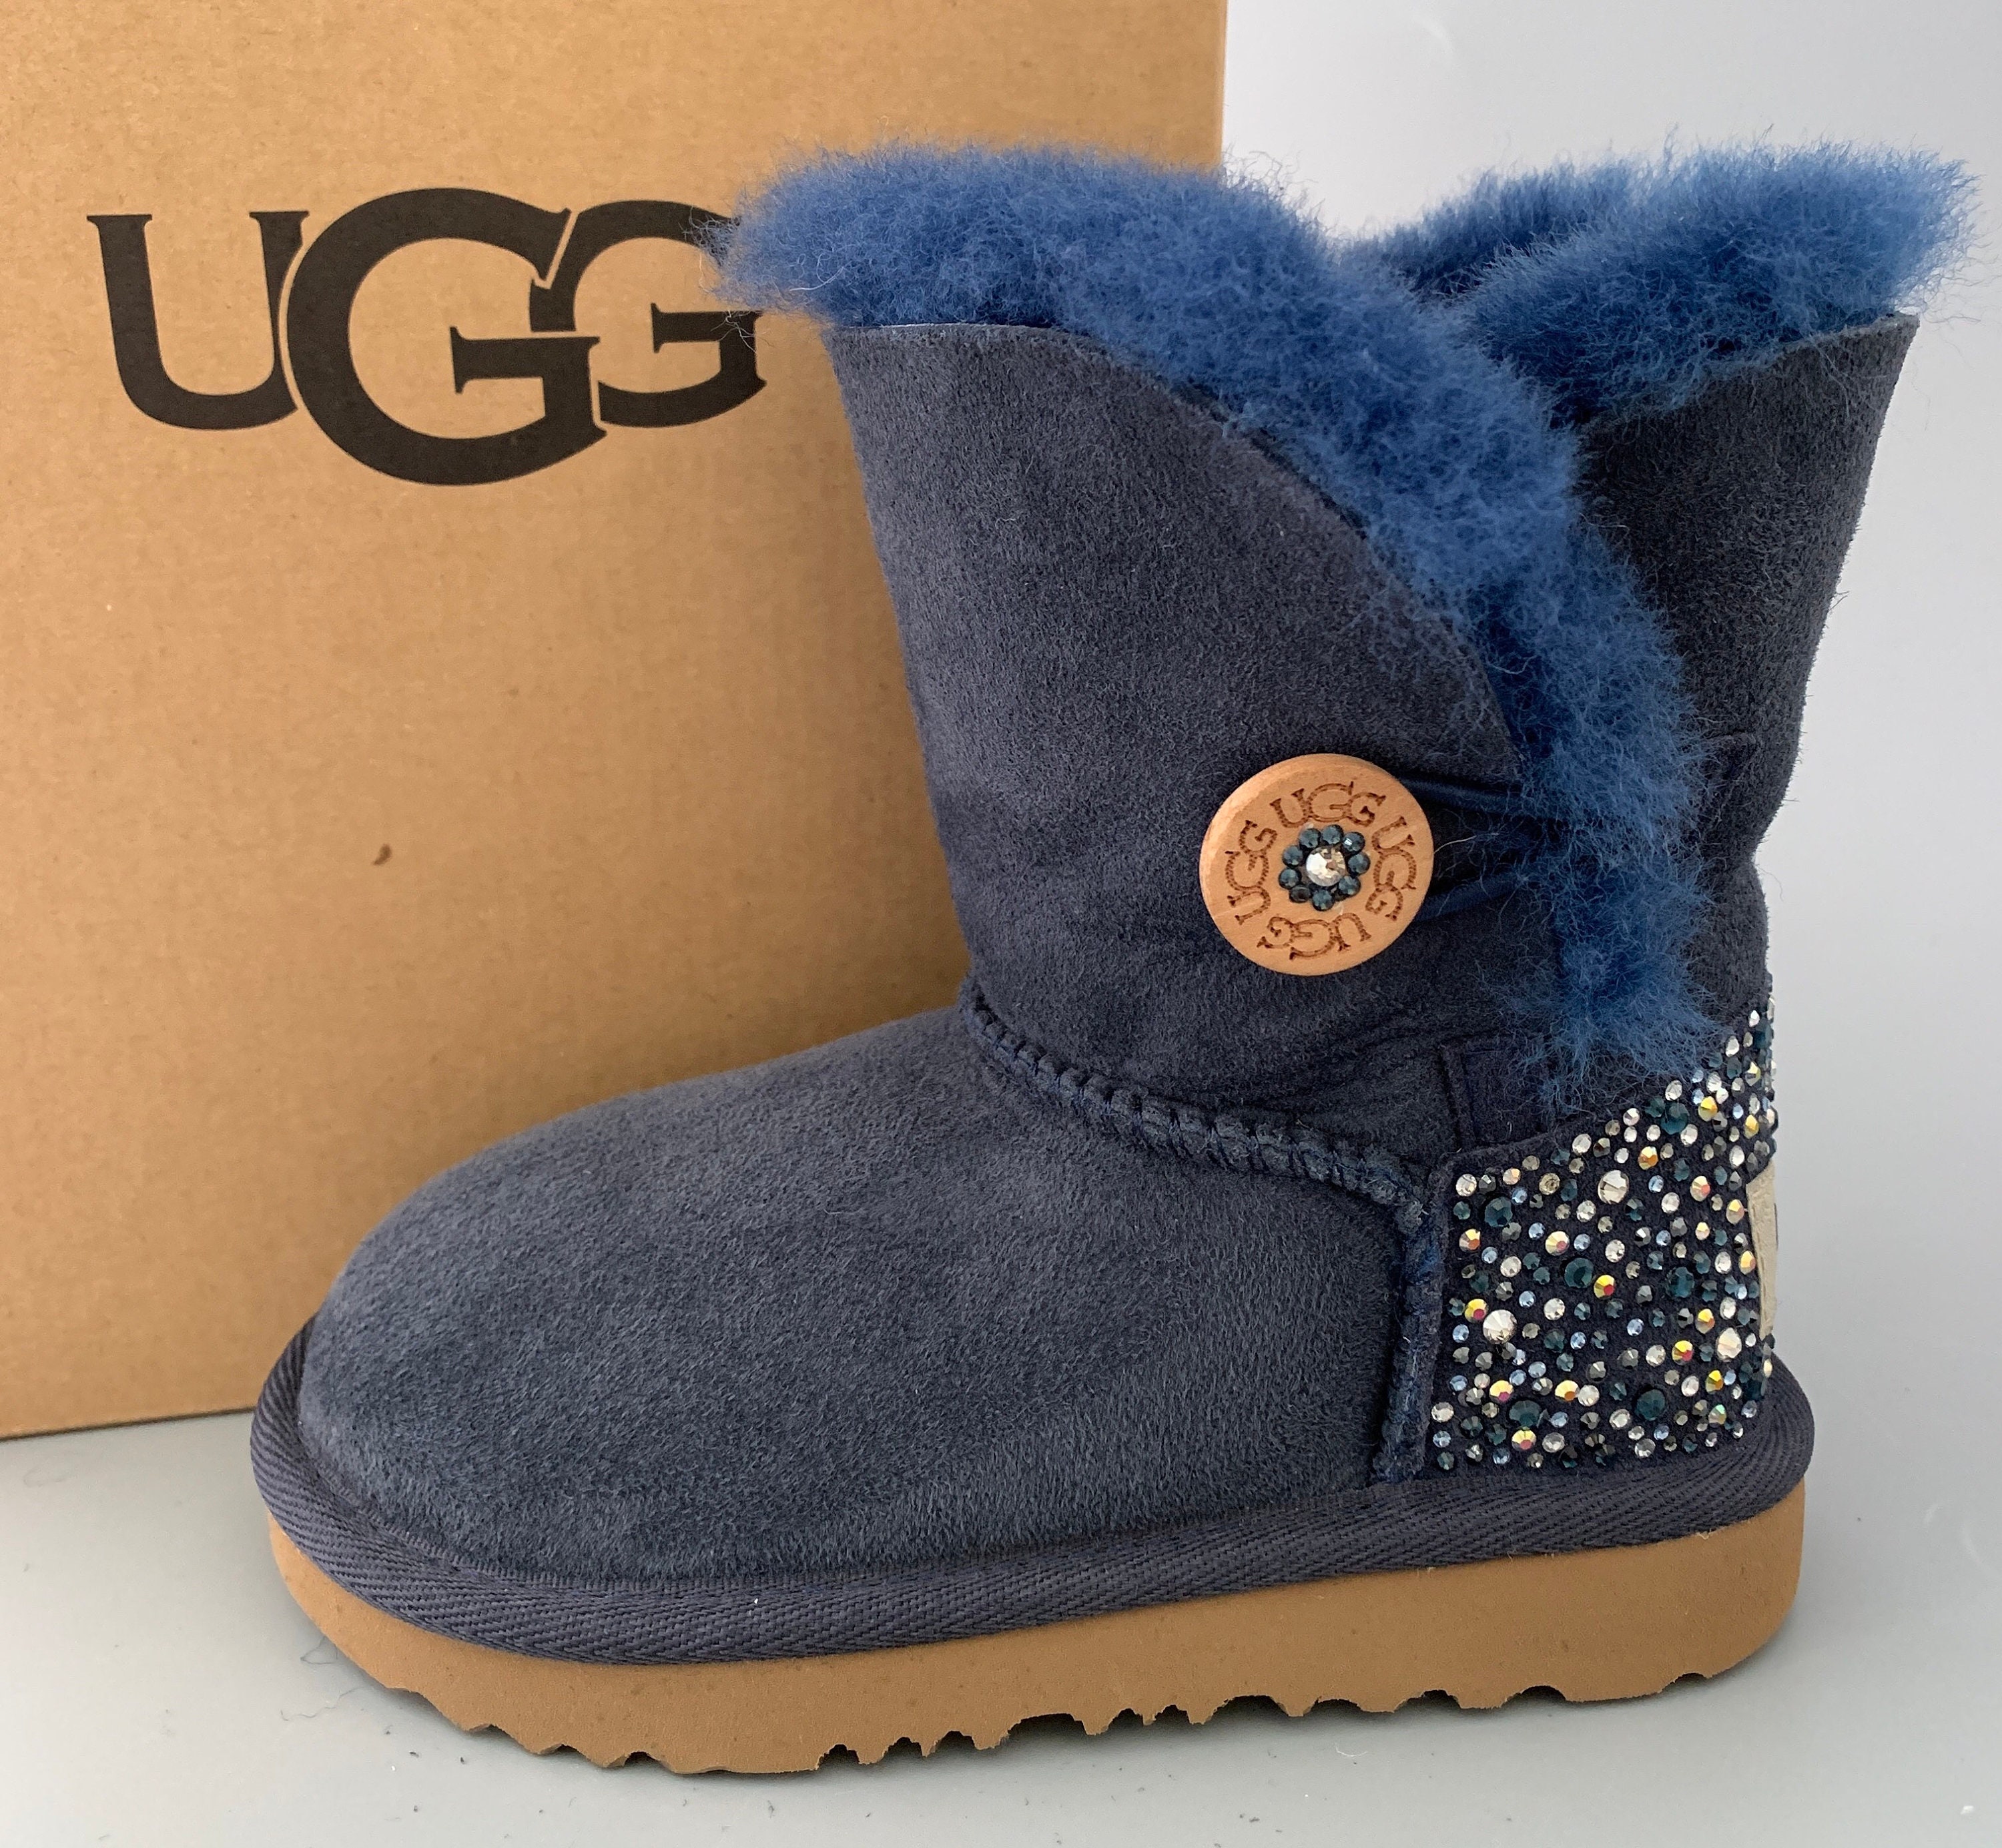 UGG, Shoes, Bailey Button Uggs With Unique Hand Painted Design